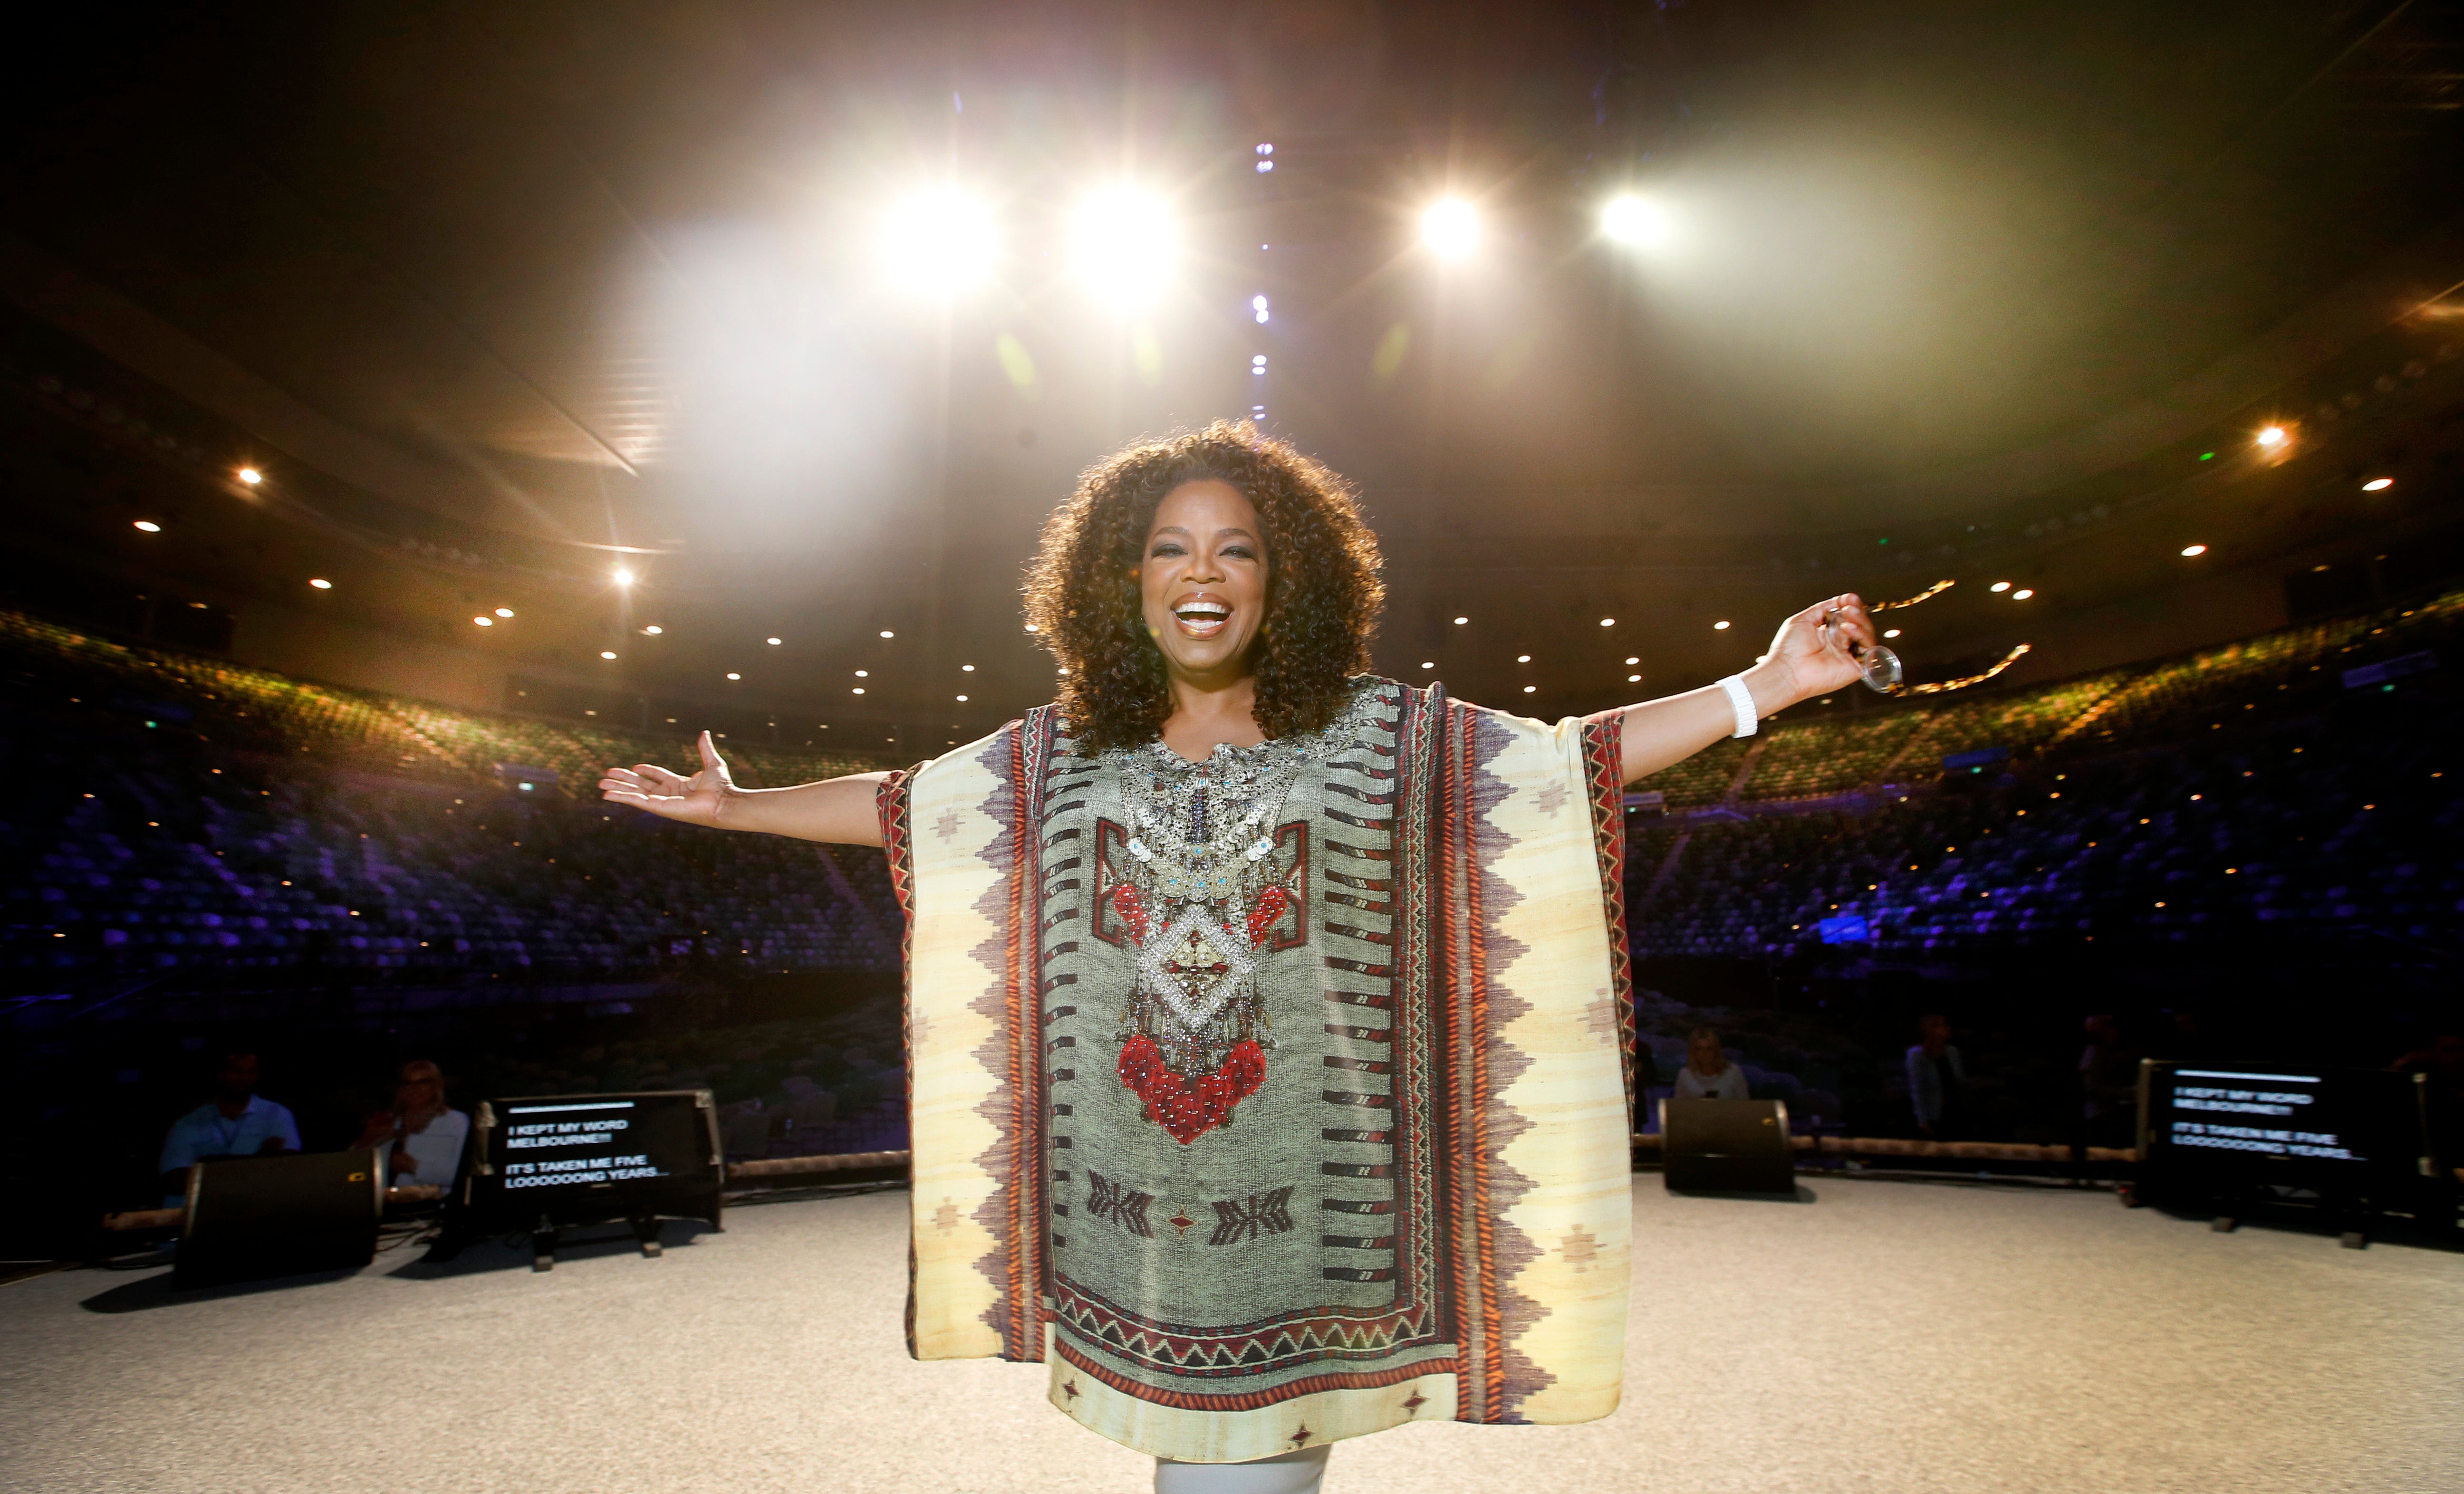 Oprah's Upcoming Memoir Will Give Readers Inspiration to Find 'The Life You Want'